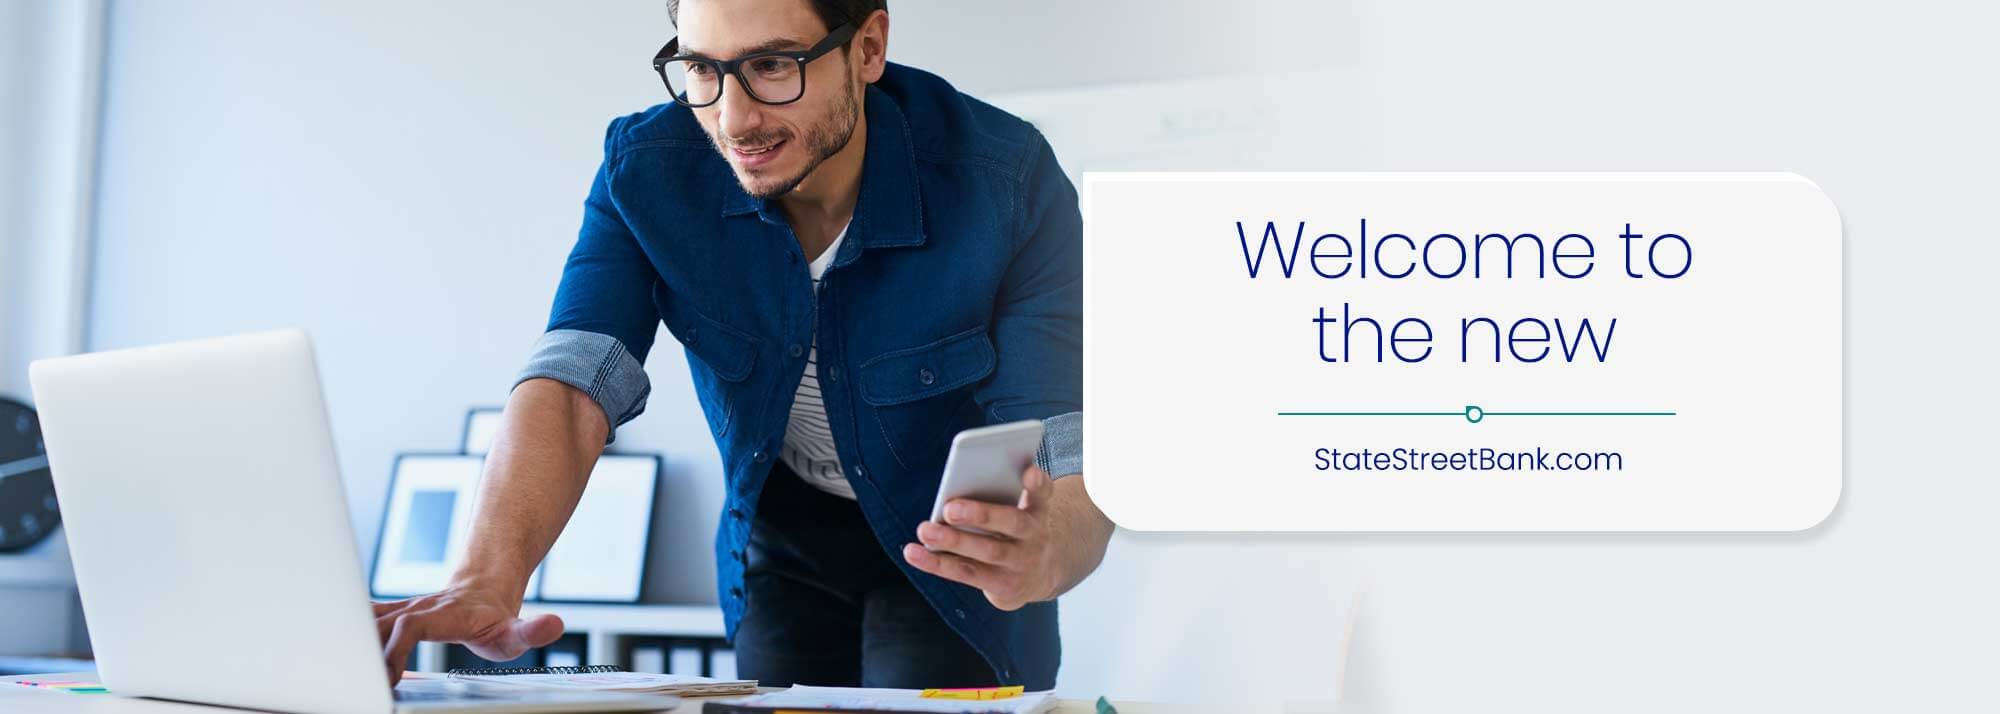 Welcome to the new  StateStreetBank.com